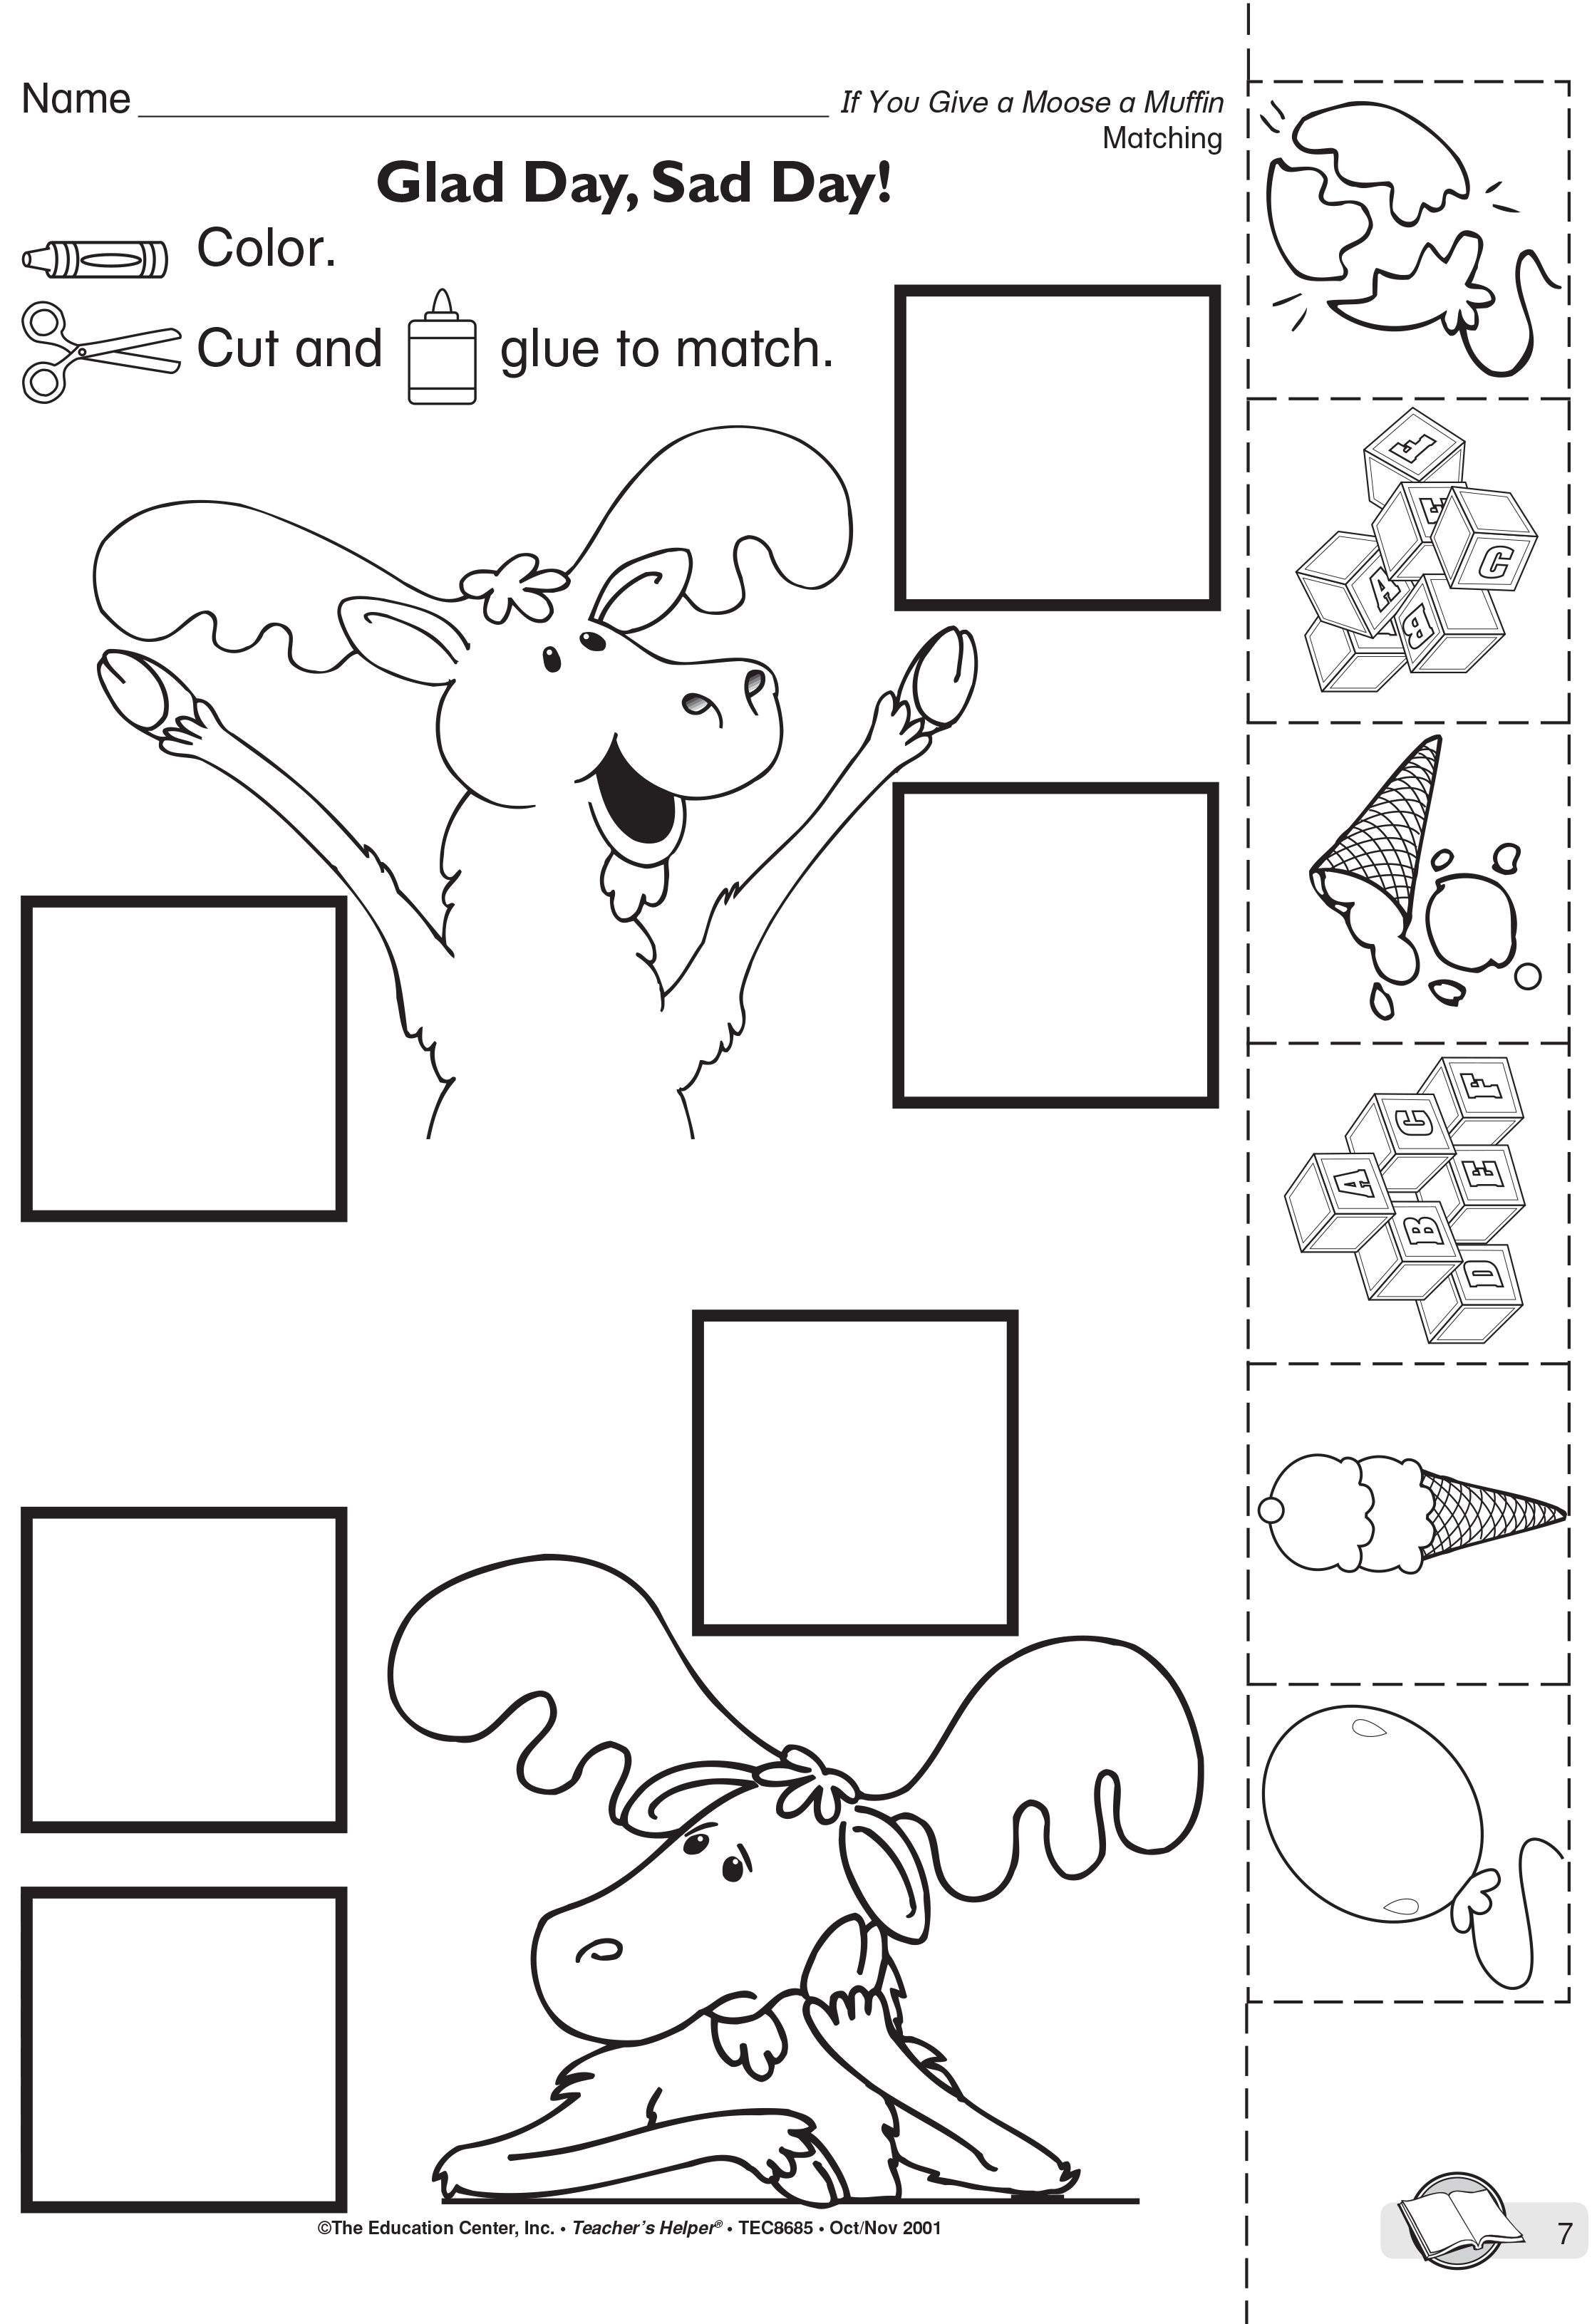 Moose Muffin Coloring Page